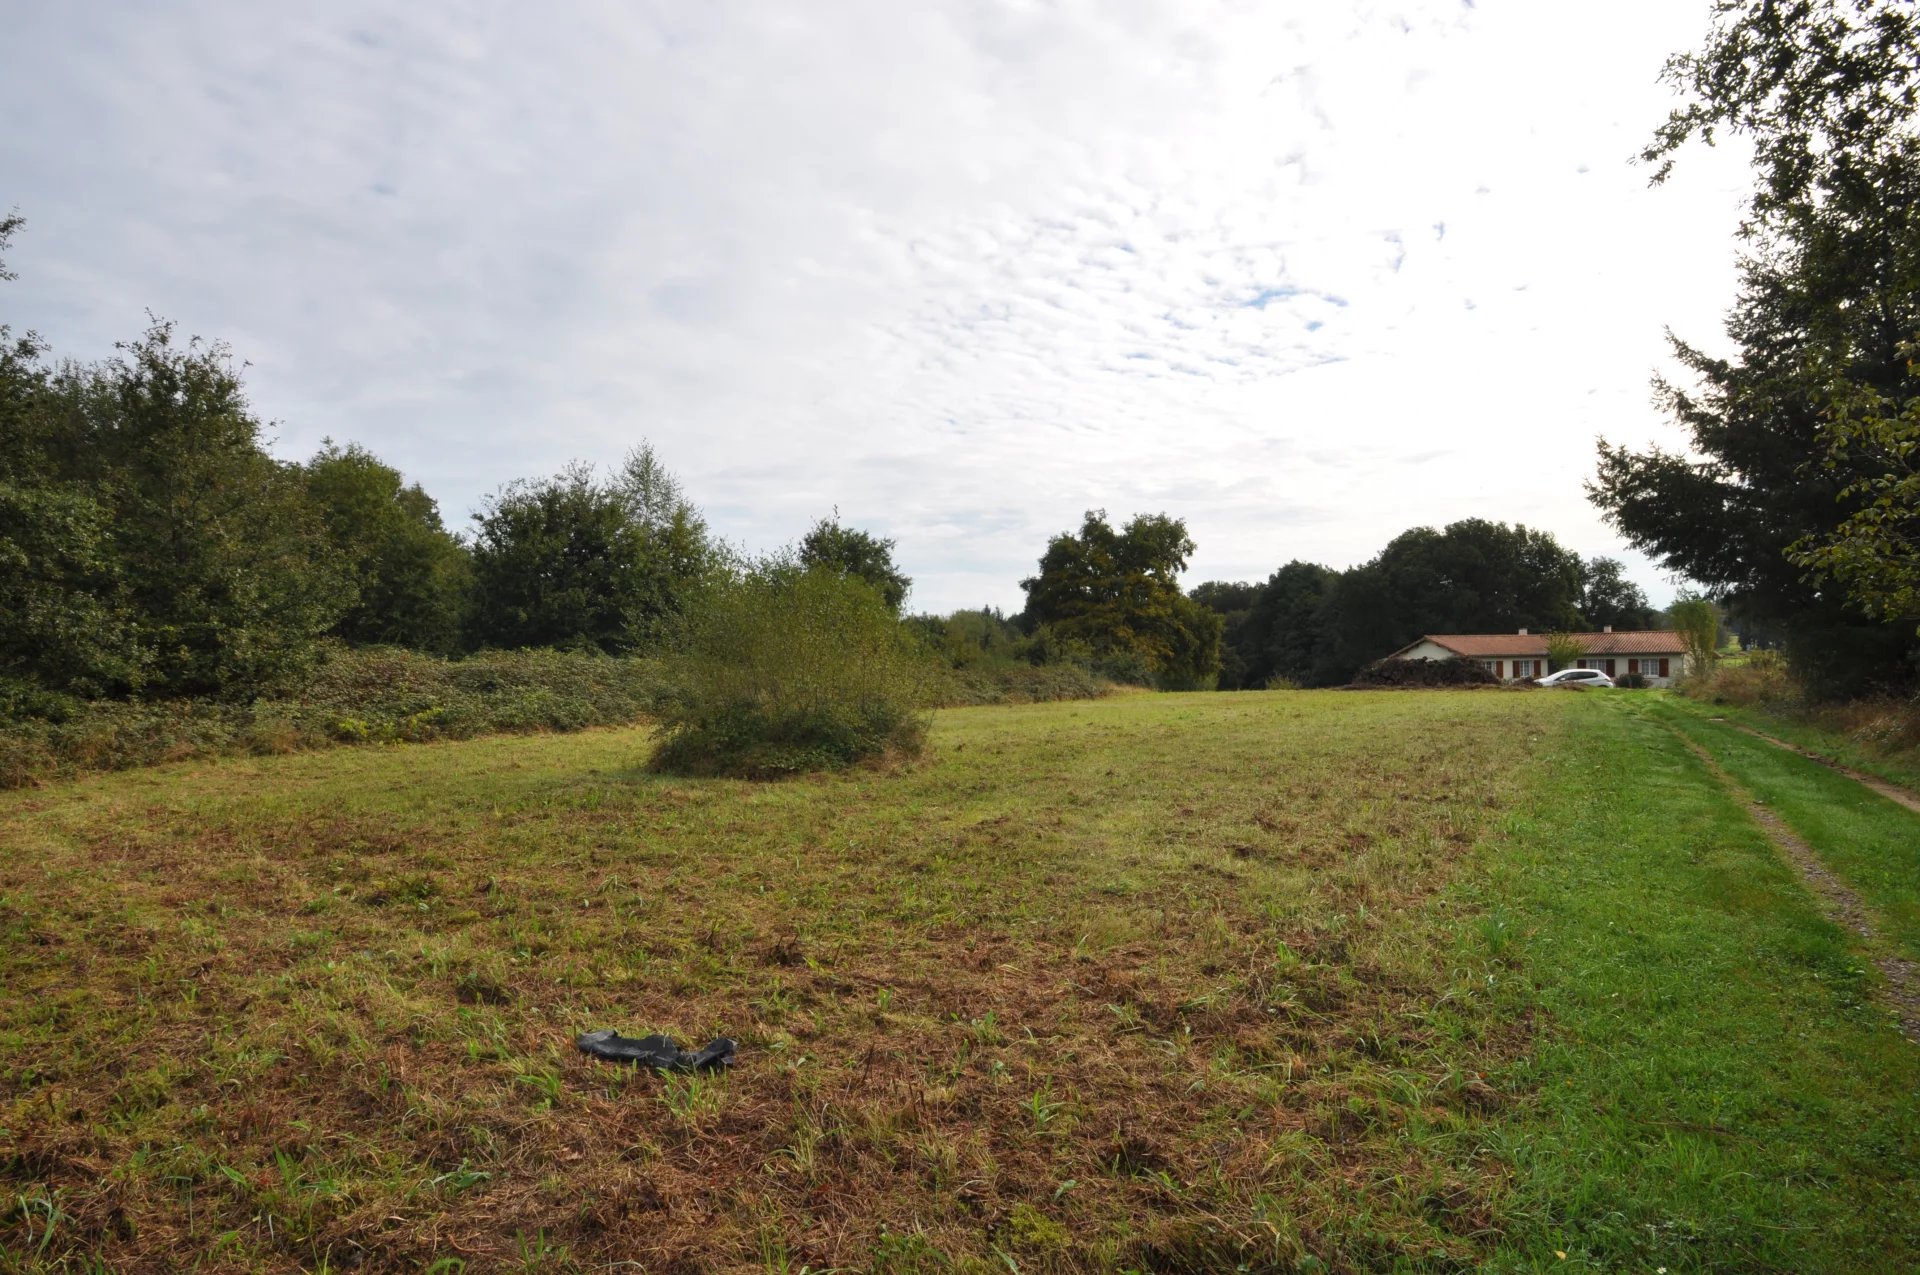 Building land for sale on the edge of a calm village